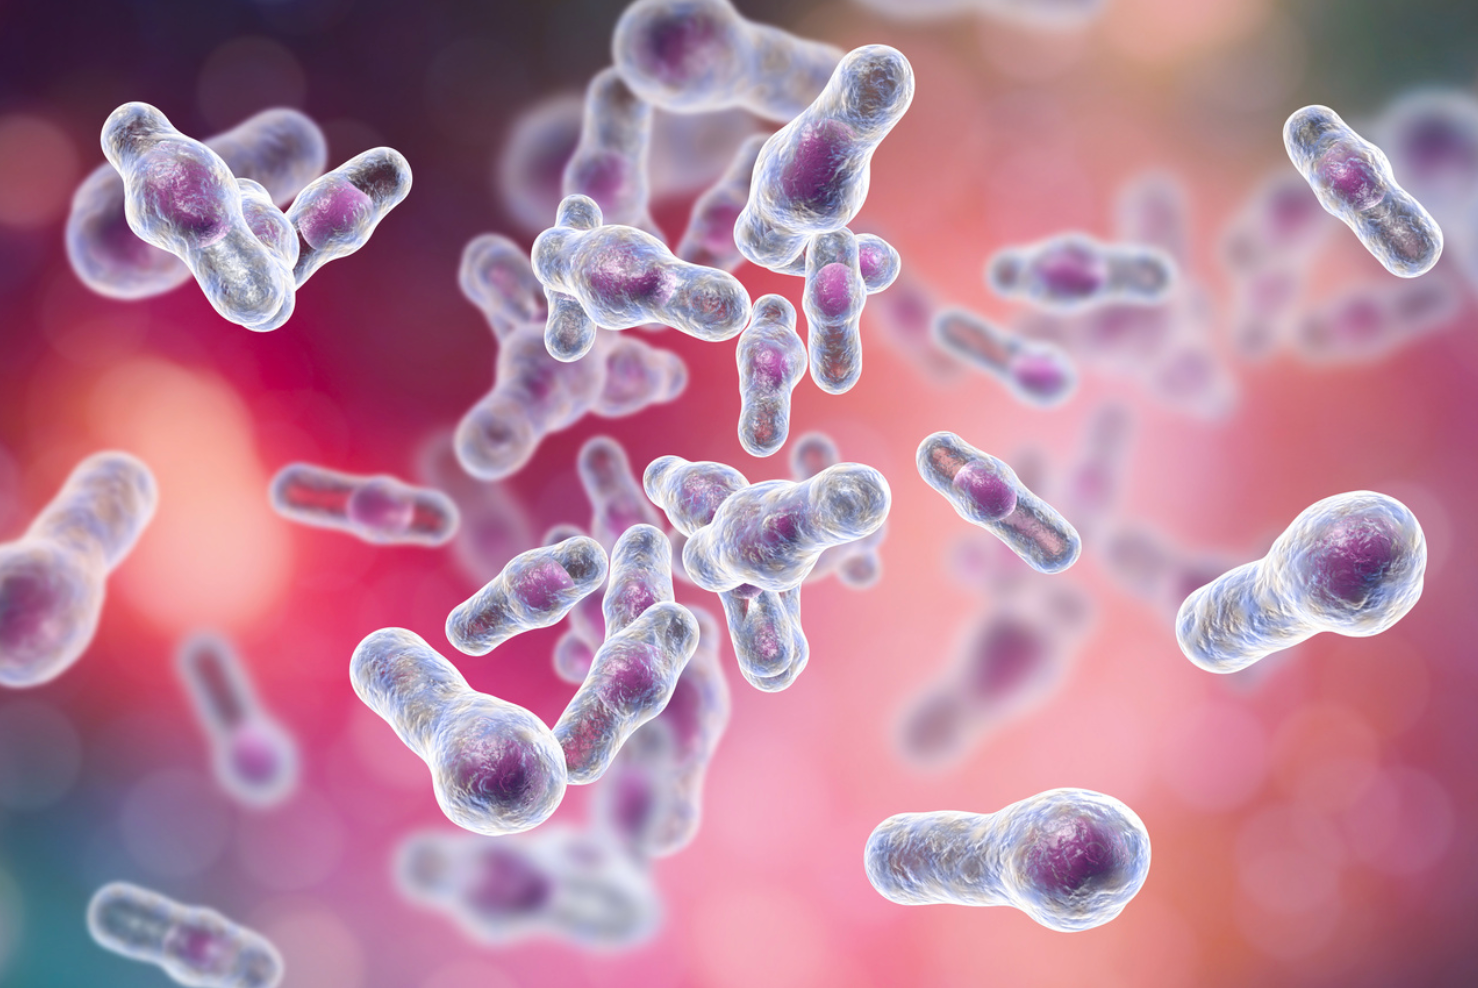 Unrecognized Costs Associated With Clostridium Difficile Infection: What HCPs Often Miss